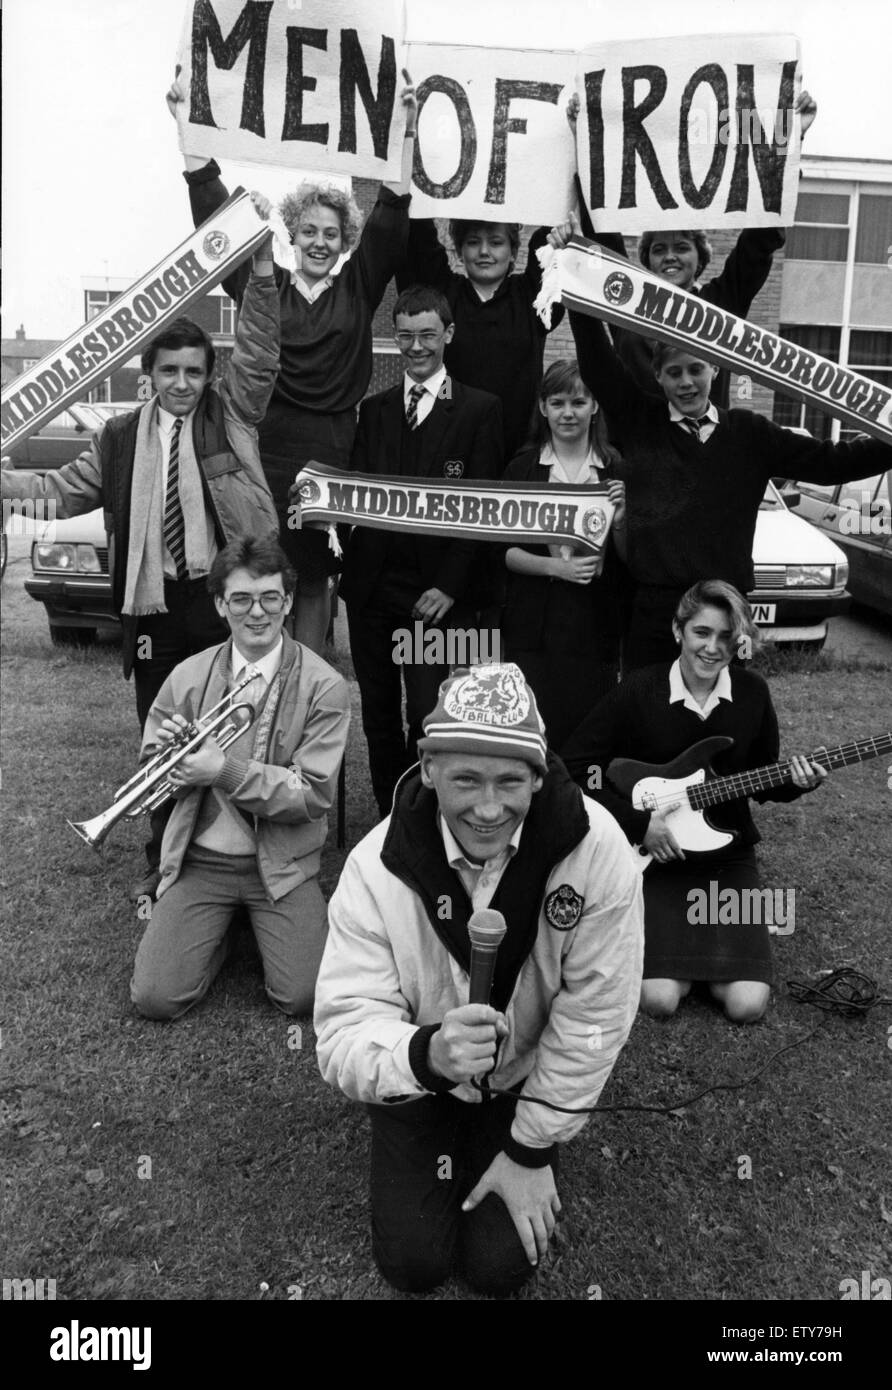 Pupils of Sacred Heart RC Secondary School in Redcar line up to practise their new pop song about Middlesbrough FC, Men of Iron. The song was composed by Edward Murphy, a teacher at the school. 13th May 1988. Stock Photo